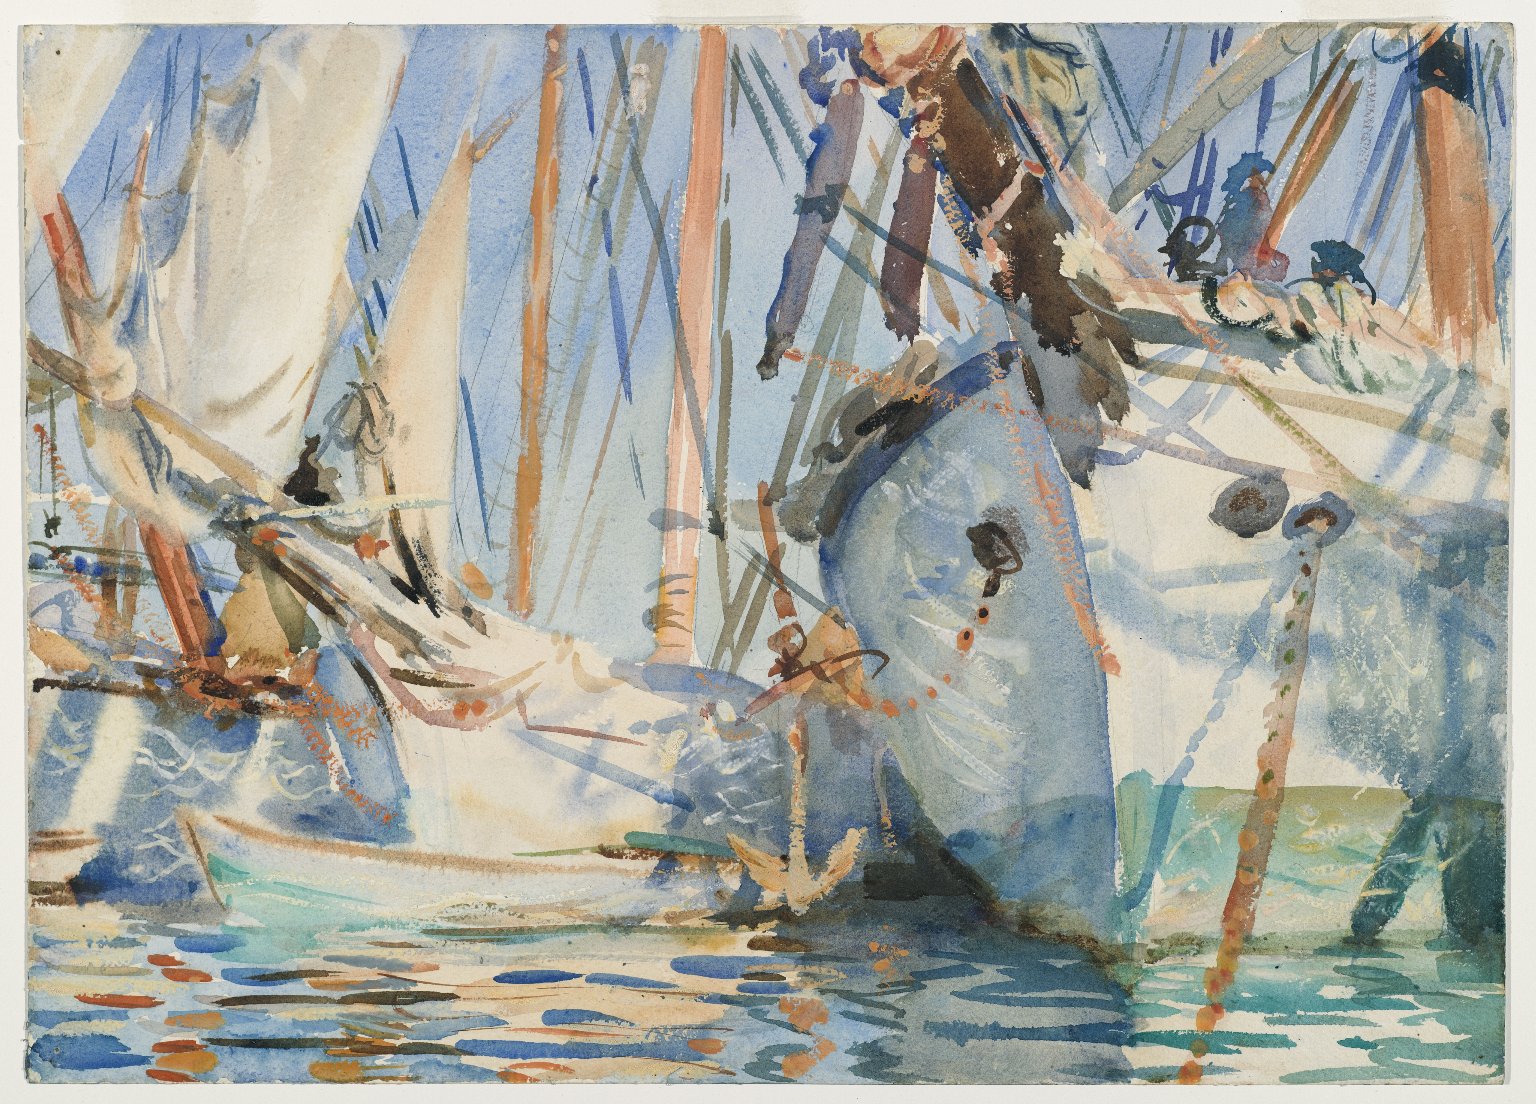 Watercolor with blue and green hues of ships, sails and rigging